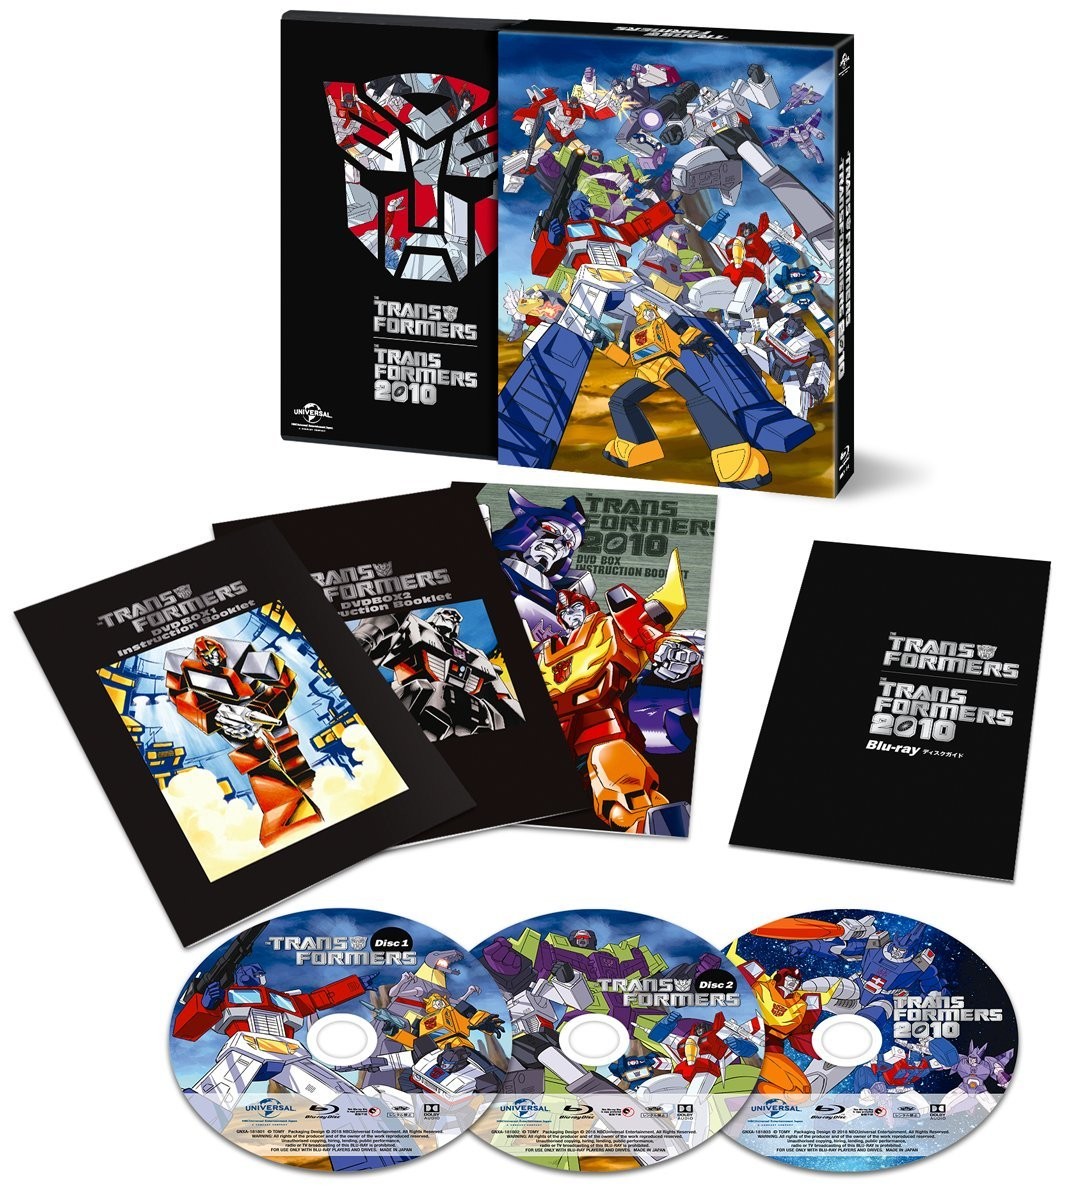 Transformers News: More Images of 3 Disk Blu-Ray Set of Japanese G1 Episodes